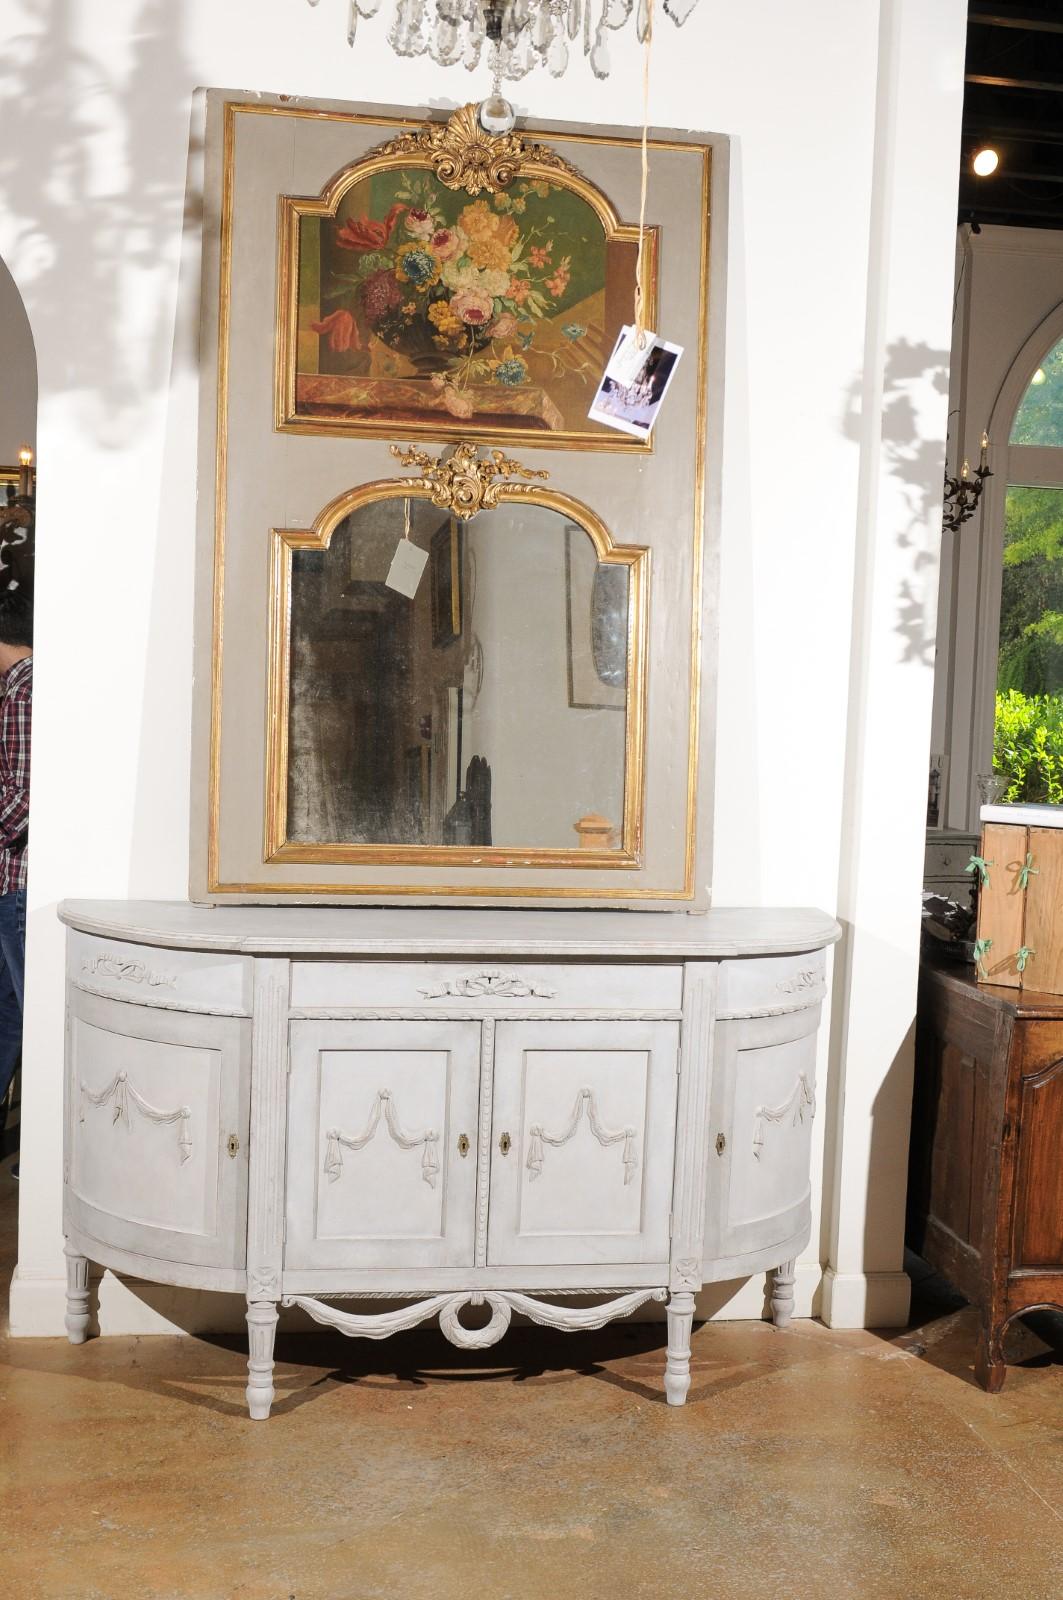 Swedish Gustavian Style Painted Wood Demilune Sideboard with Swags and Ribbons (Gustavianisch)